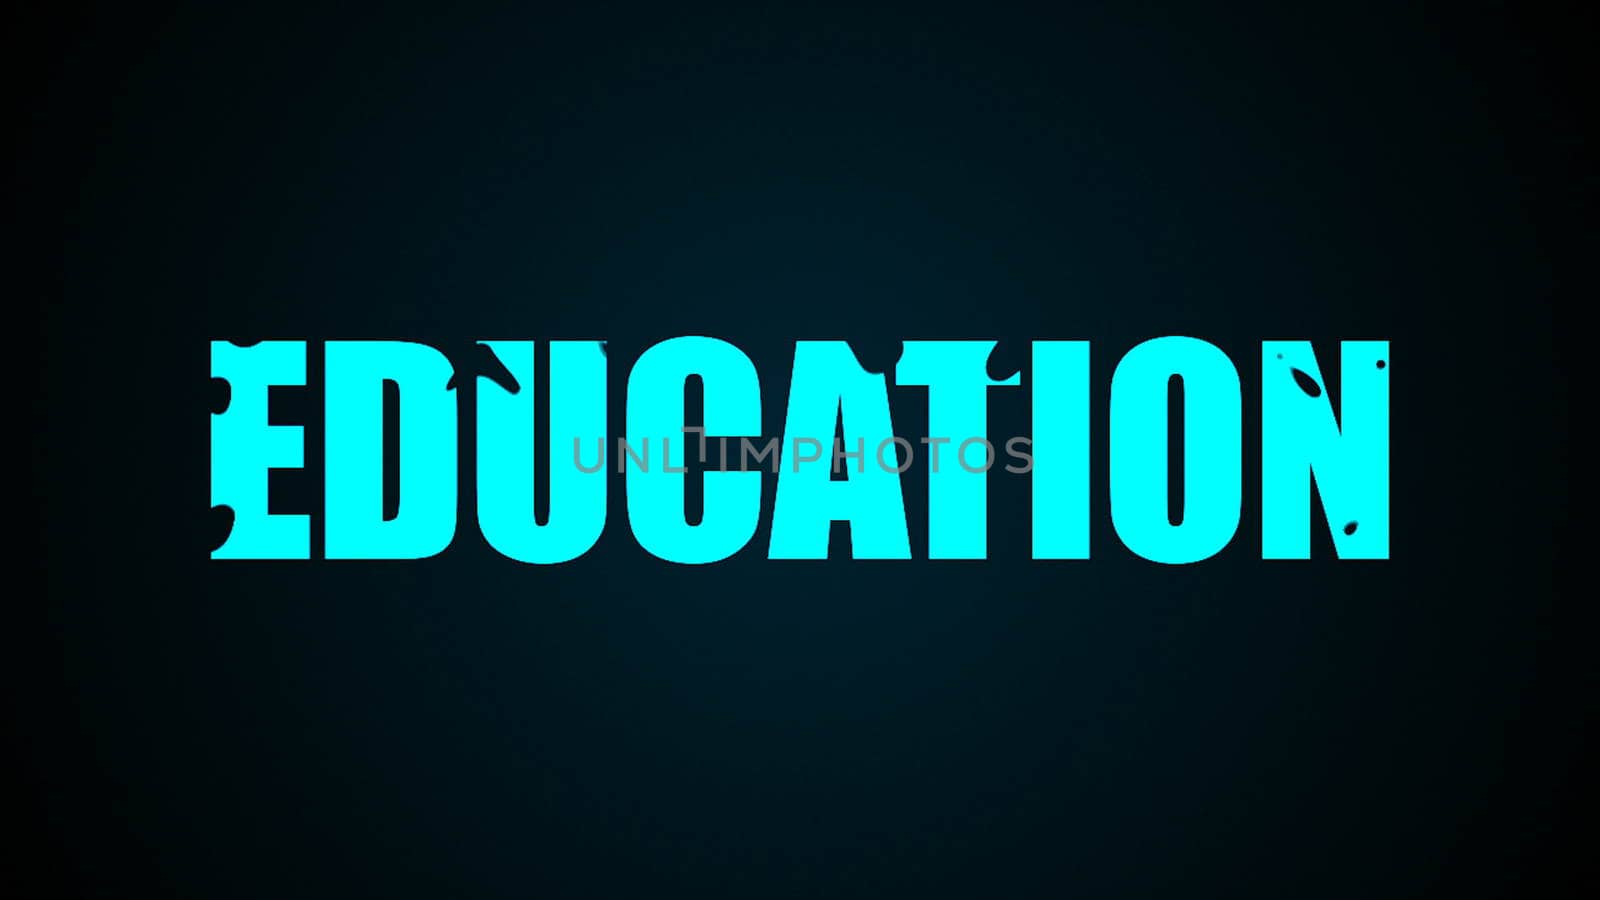 Education text. Abstract background. Digital 3d rendering. by nolimit046